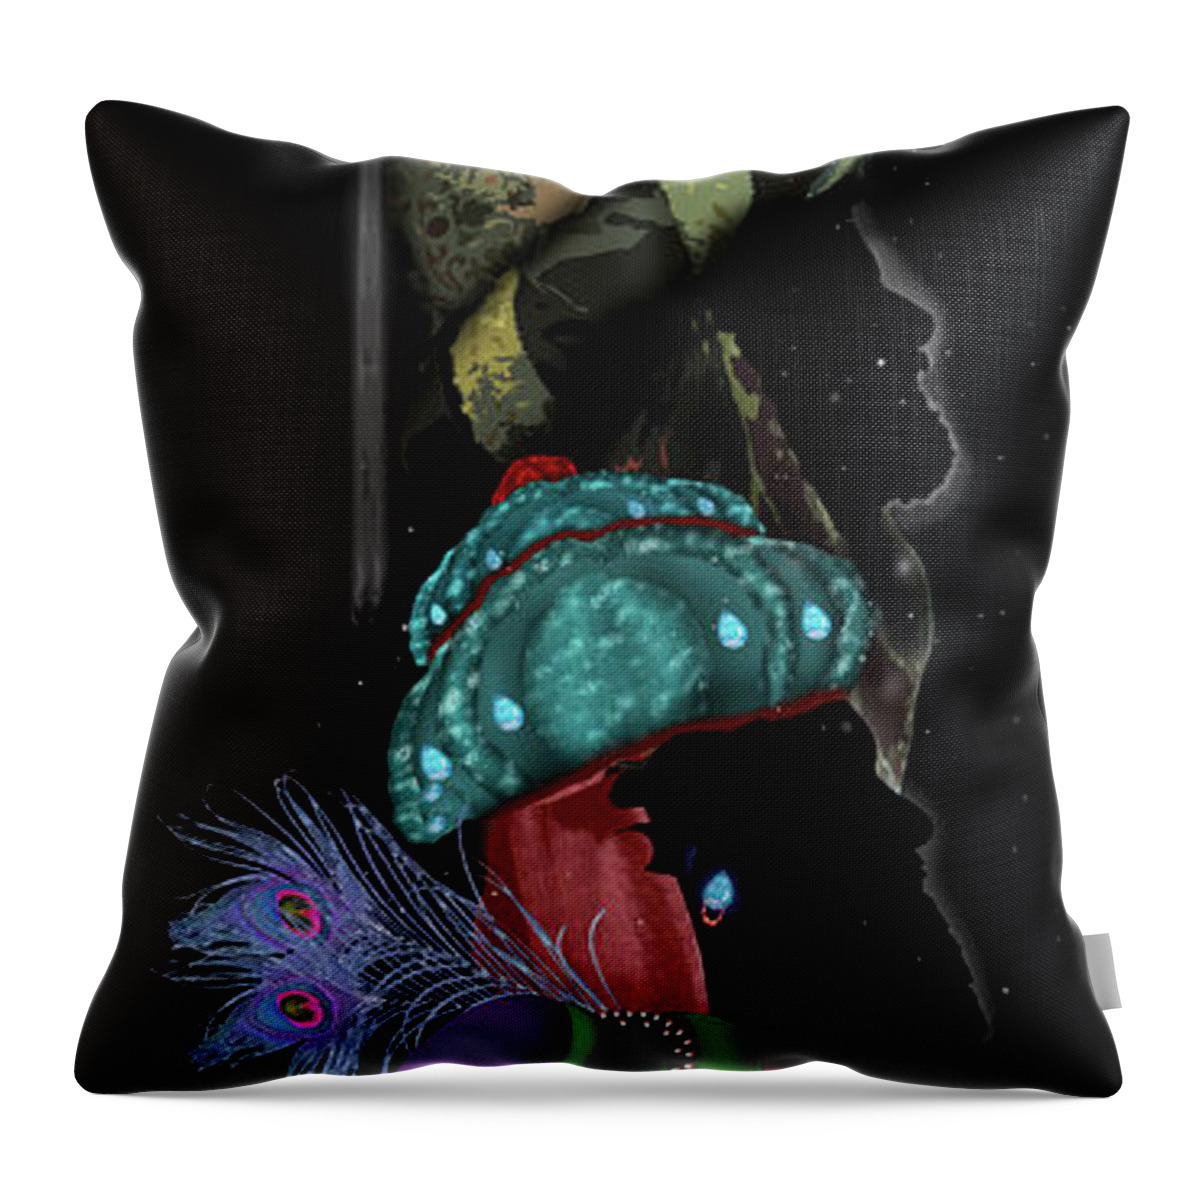 Three Throw Pillow featuring the digital art The Wise Men by Julie Rodriguez Jones